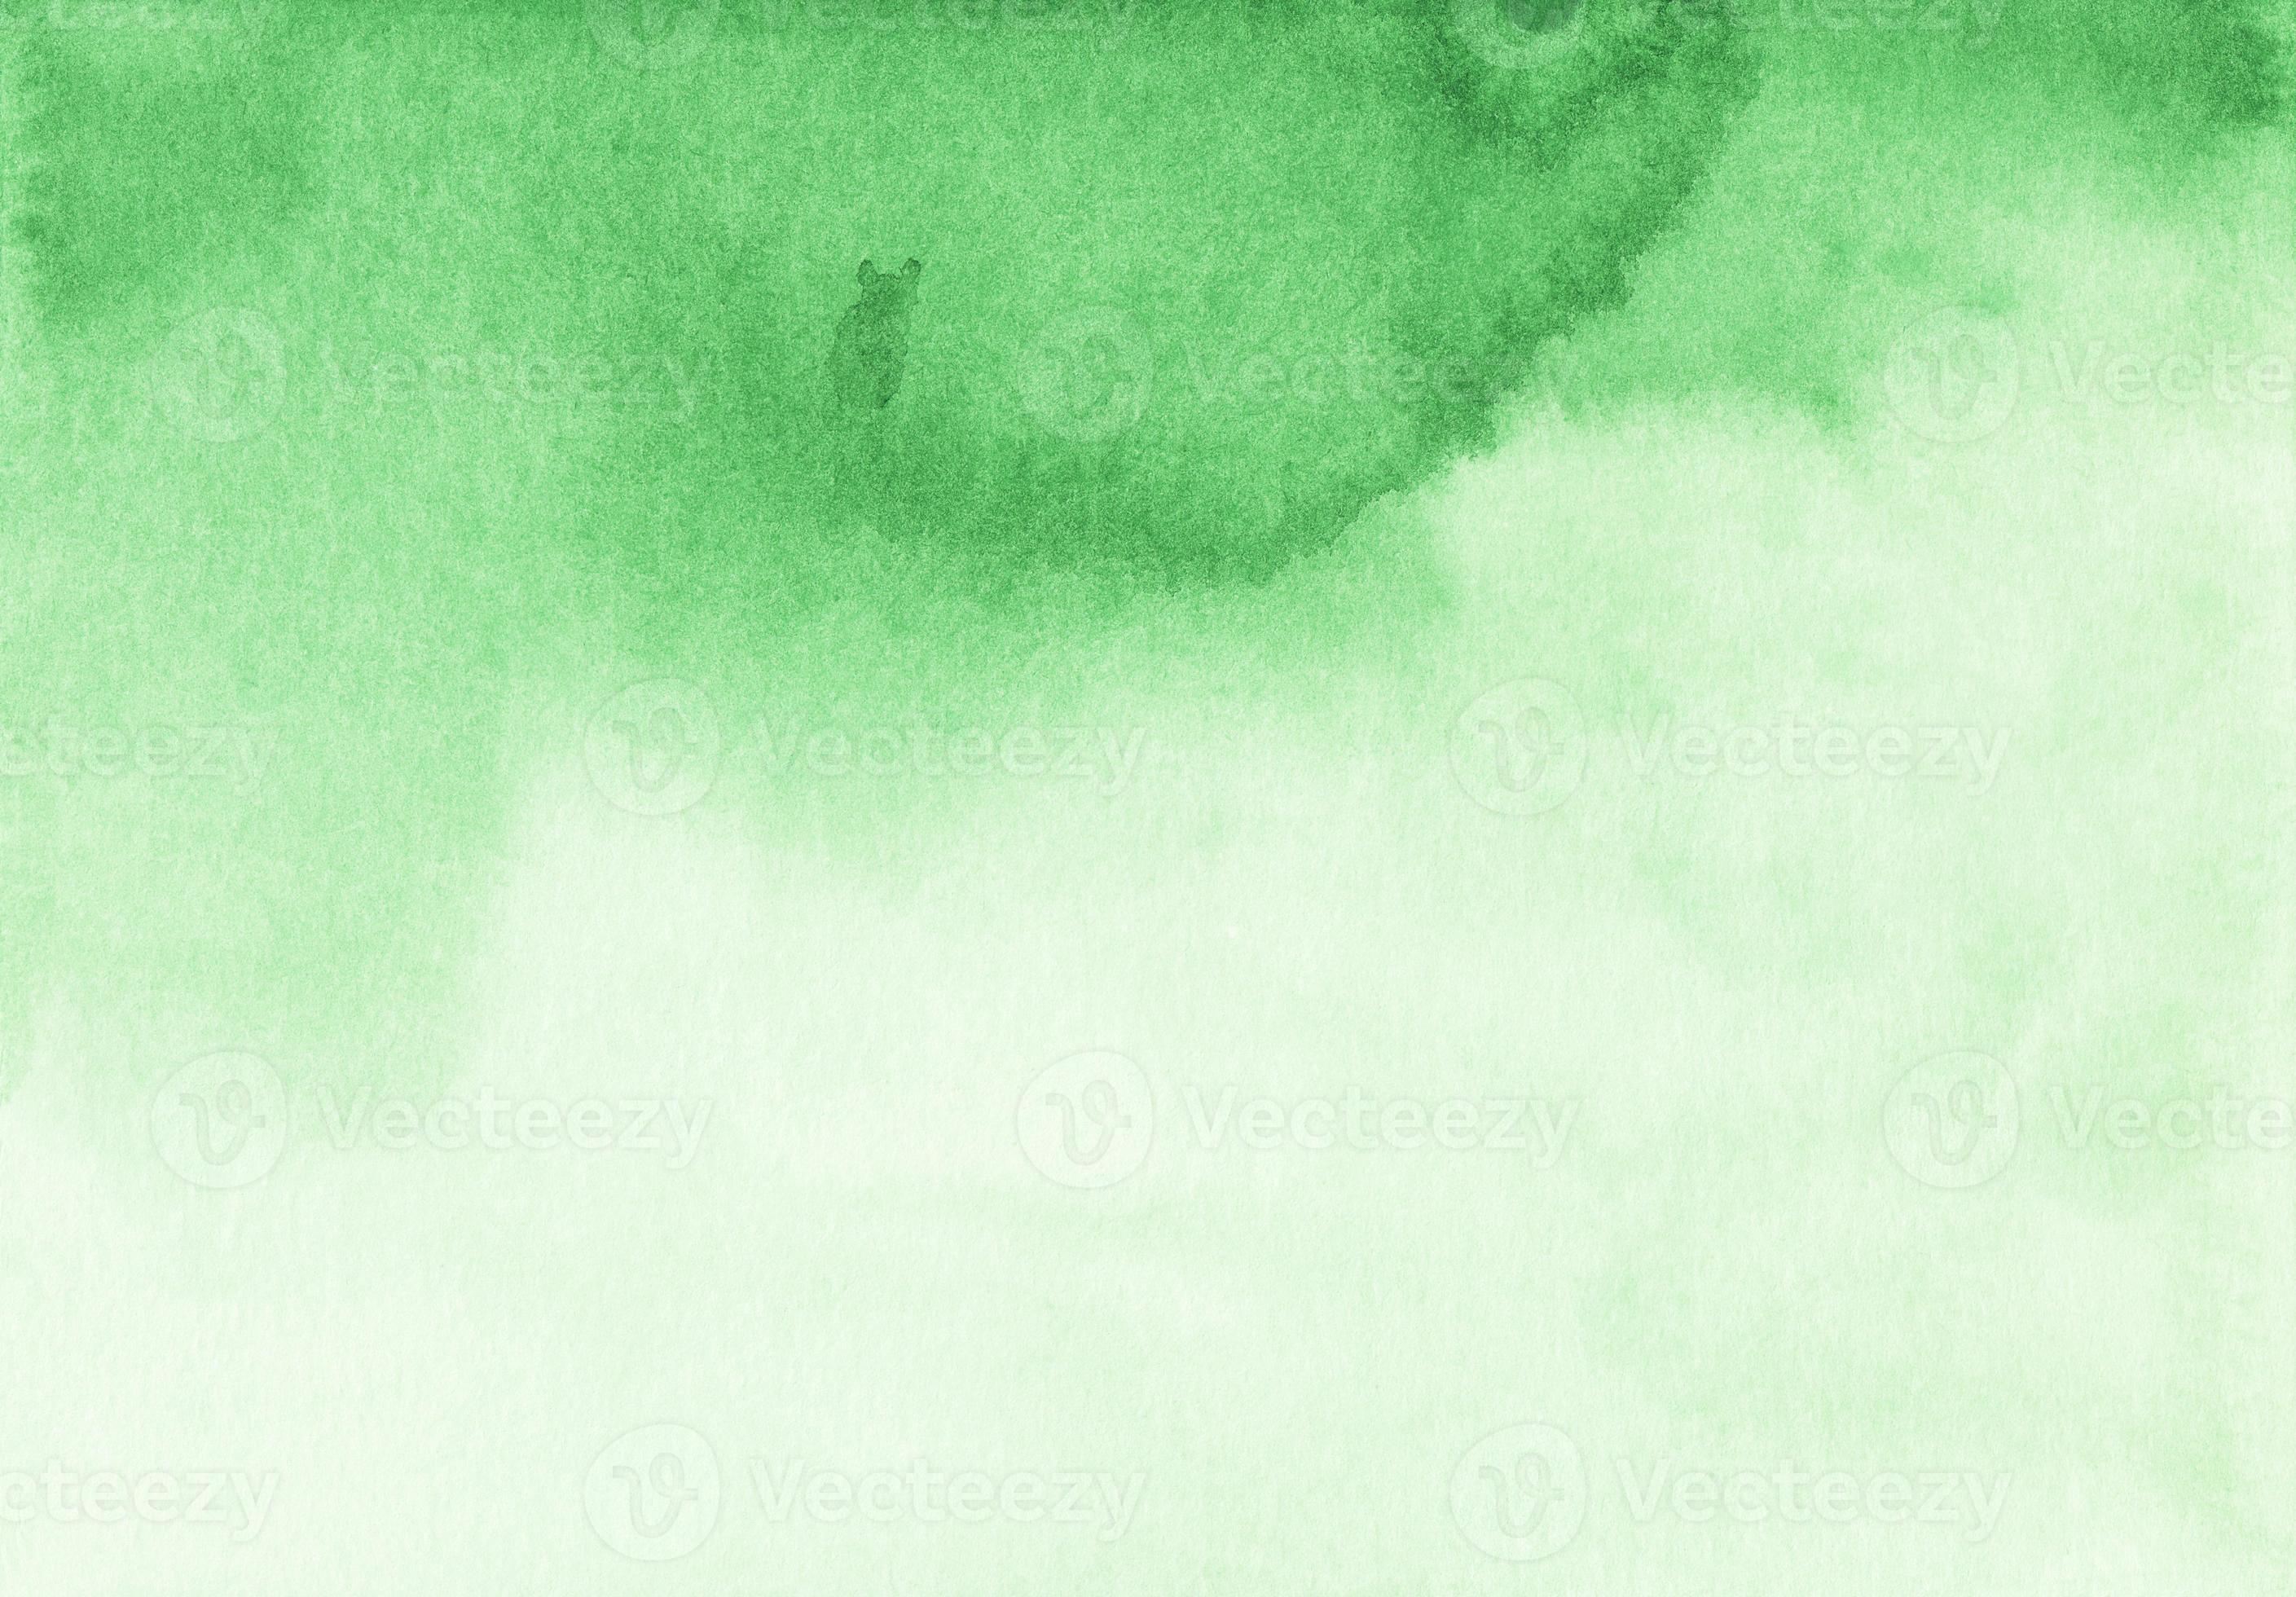 https://static.vecteezy.com/system/resources/previews/012/313/114/large_2x/watercolor-light-green-ombre-background-texture-aquarelle-pastel-green-gradient-backdrop-horizontal-template-photo.jpg